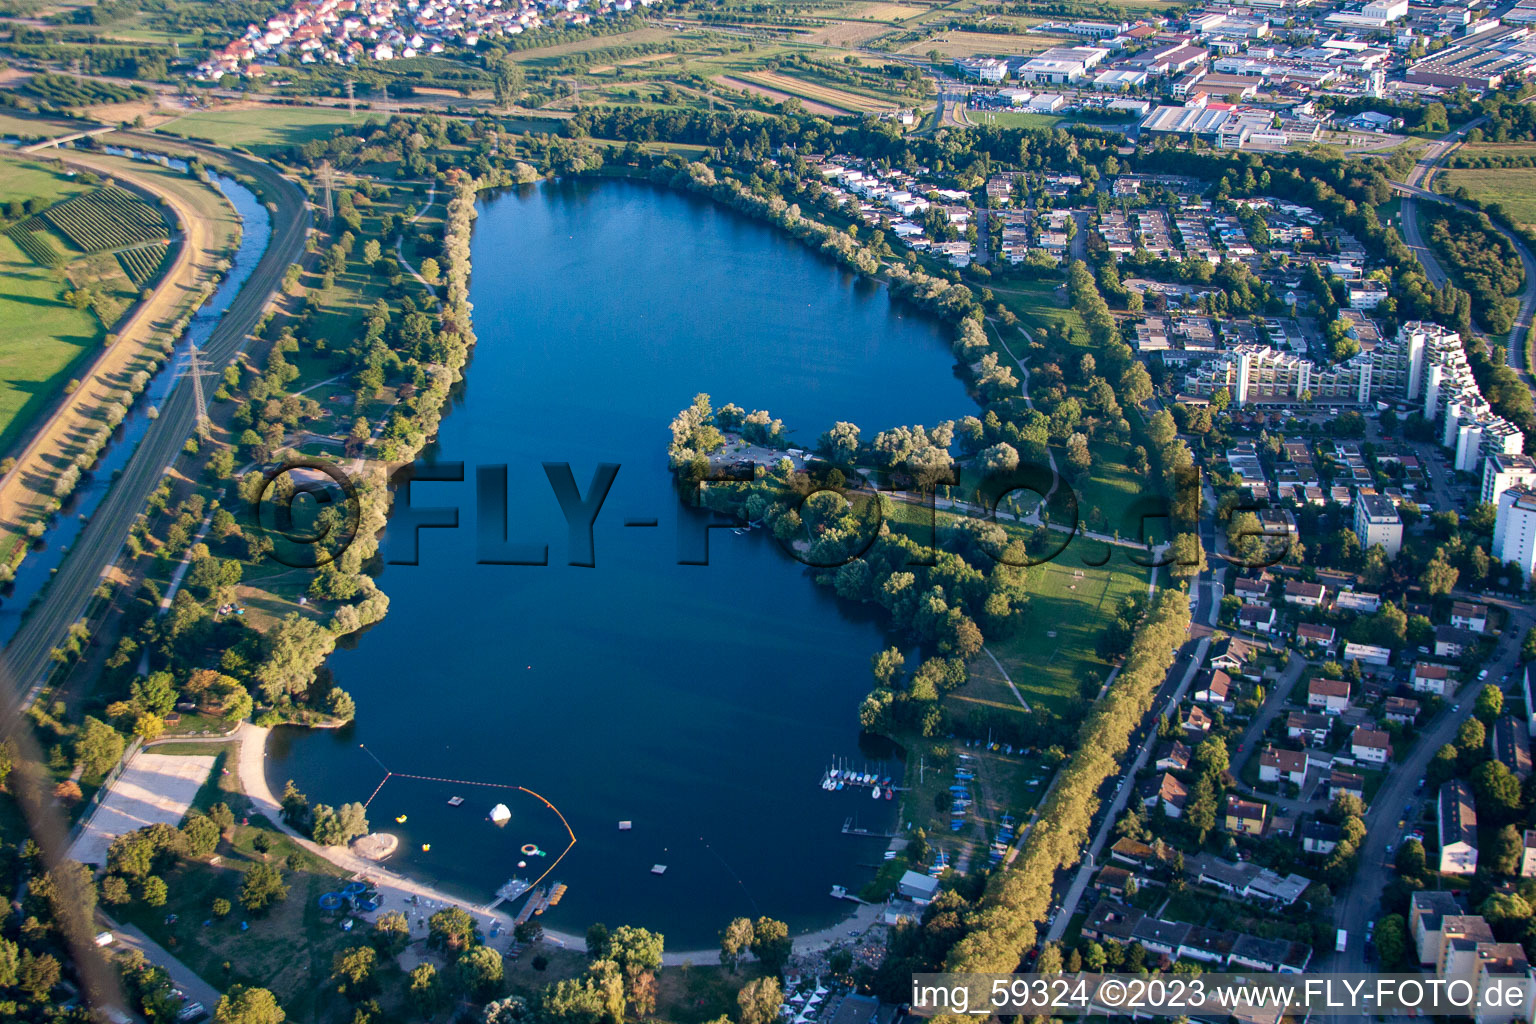 Aerial view of Gifiz Lake in the district Uffhofen in Offenburg in the state Baden-Wuerttemberg, Germany